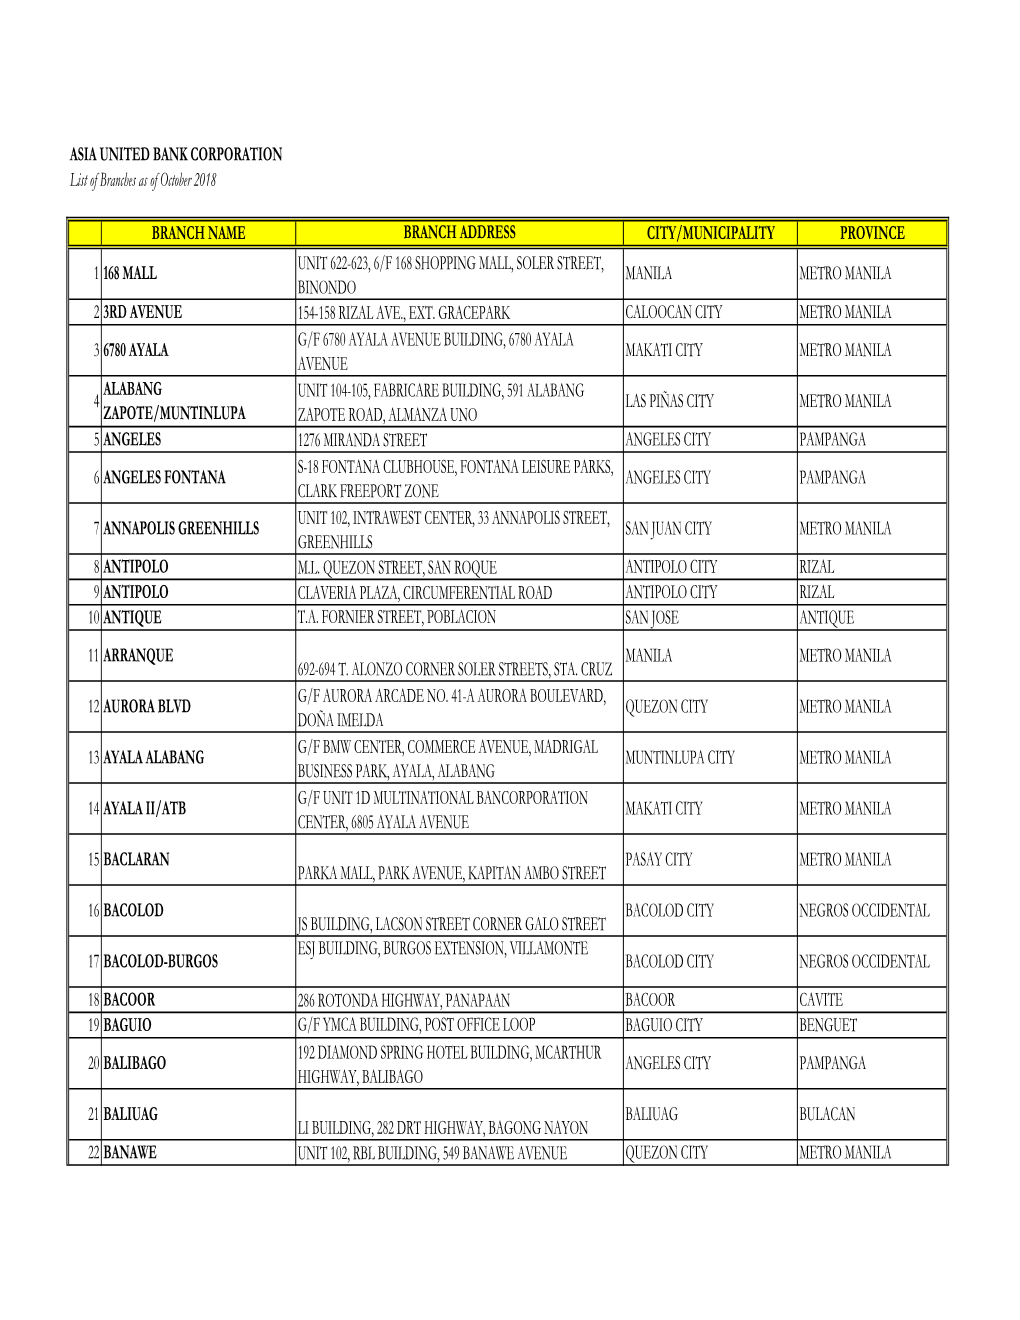 ASIA UNITED BANK CORPORATION List of Branches As of October 2018